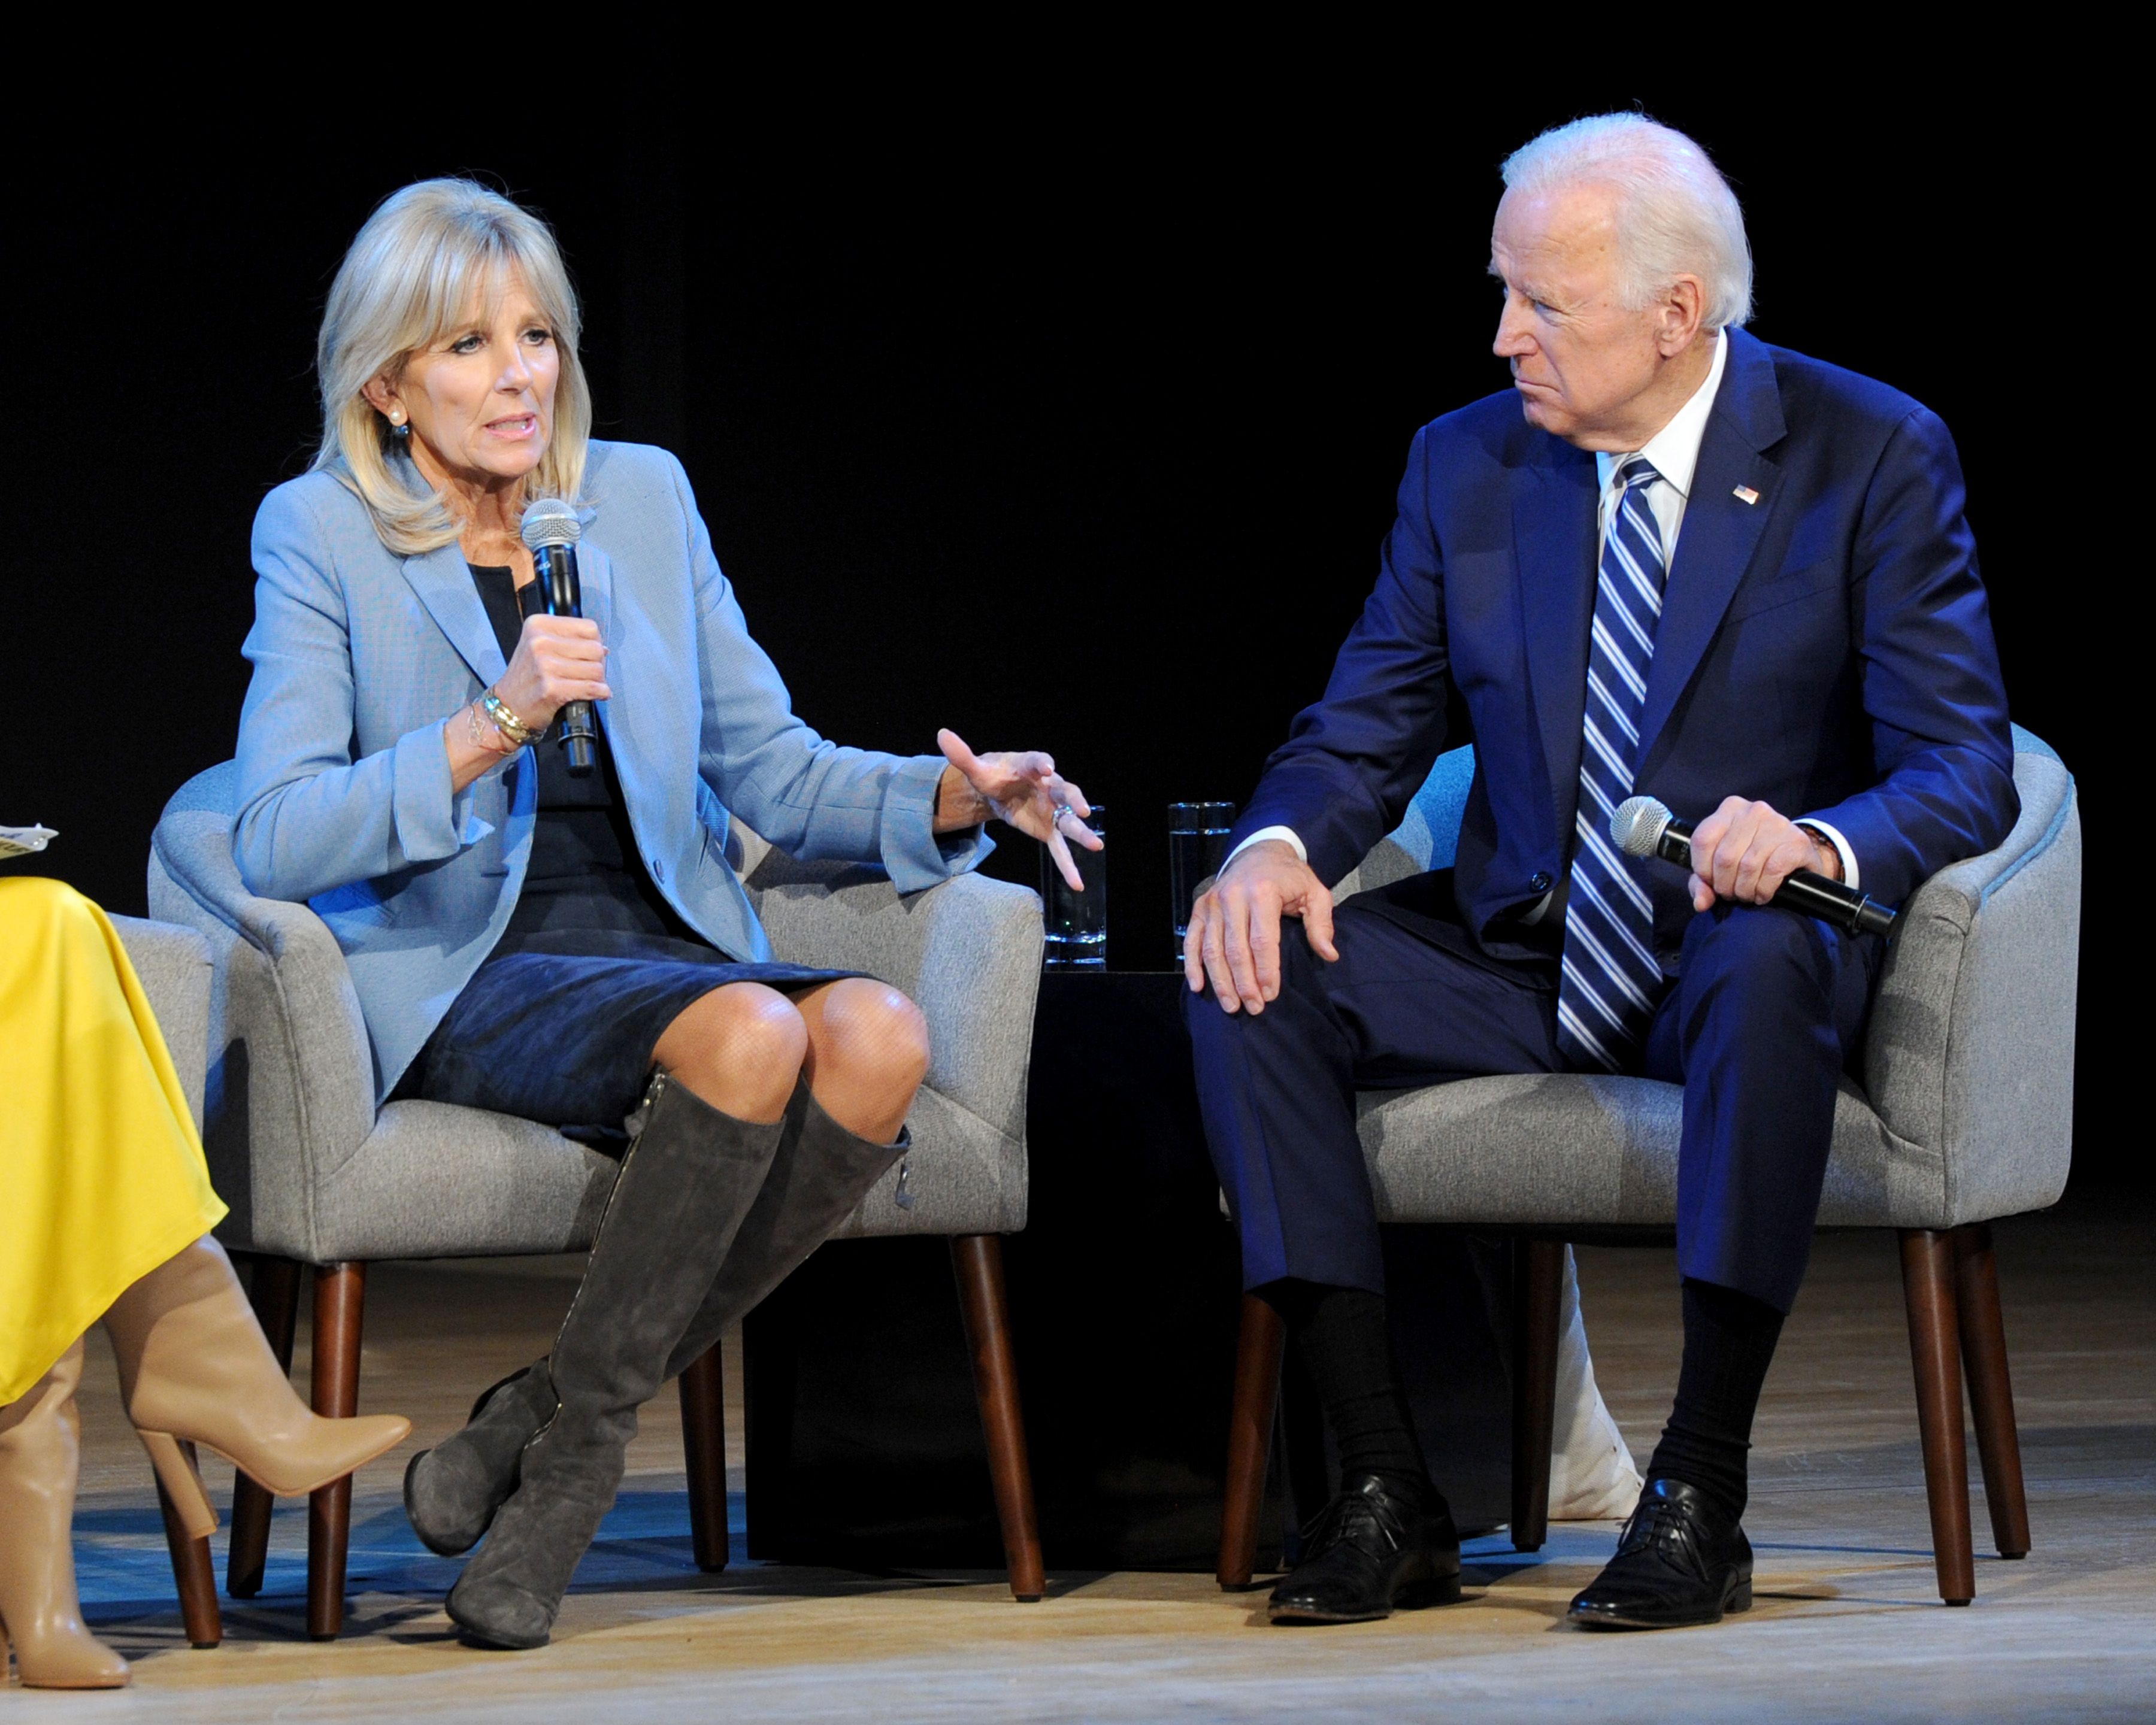 Dr. Jill Biden, and Joe Biden speak onstage during Glamour Celebrates 2017 Women Of The Year Live Summit at Brooklyn Museum on November 13, 2017 | Getty Images